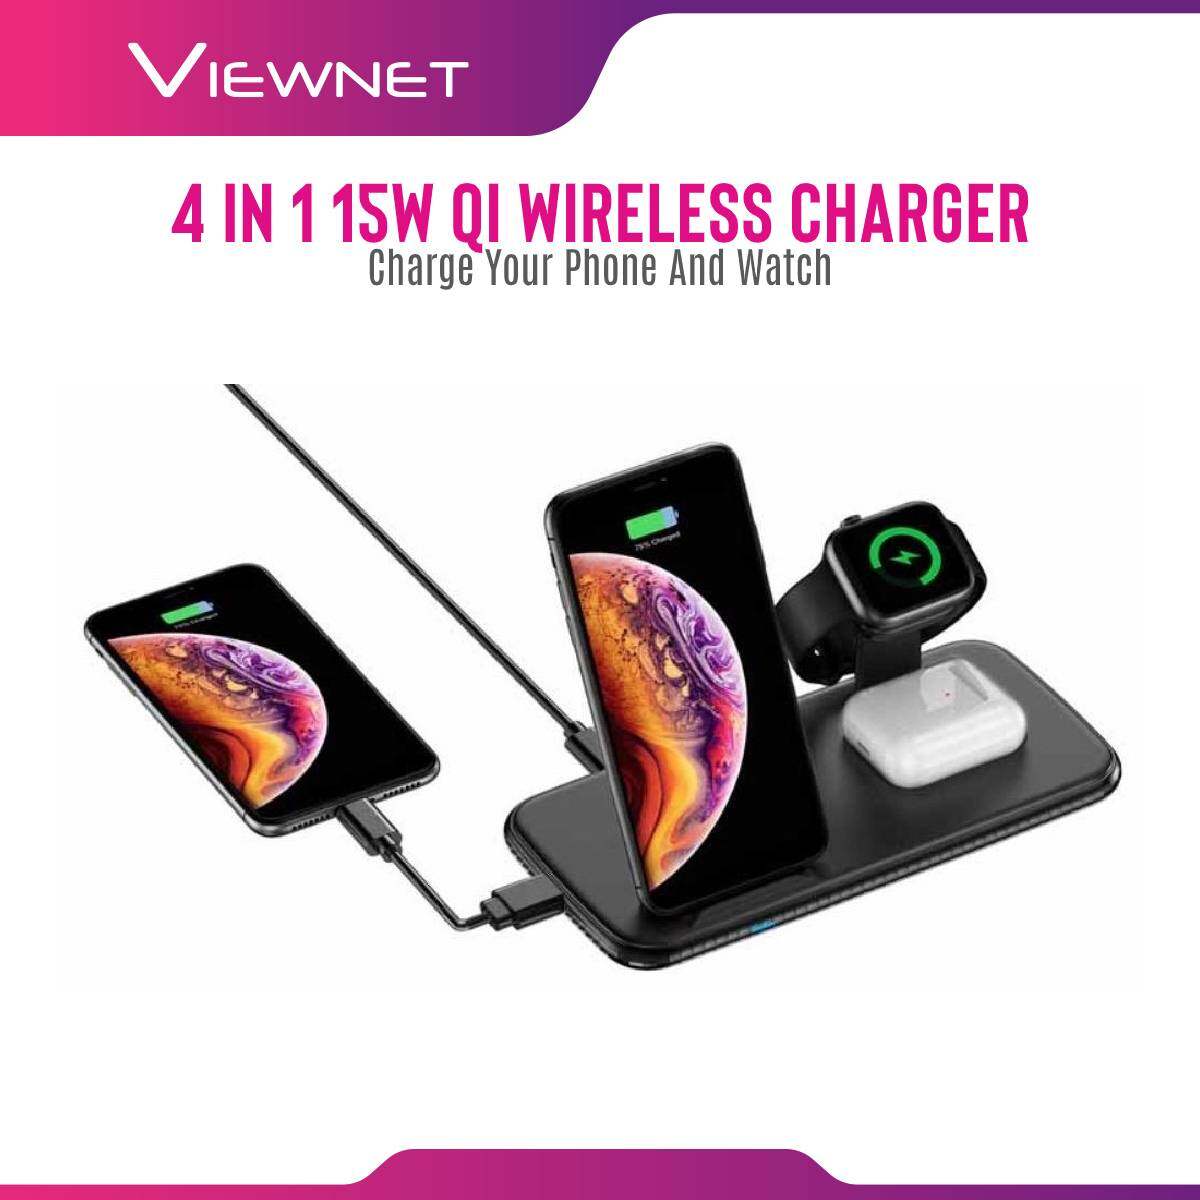 4 in 1 15W Qi Wireless Charger For  iPhone 12 11 Max XS XR 8 Plus Airpods Pro iWatch Apple Watch 6 5 4 SE Charging Dock